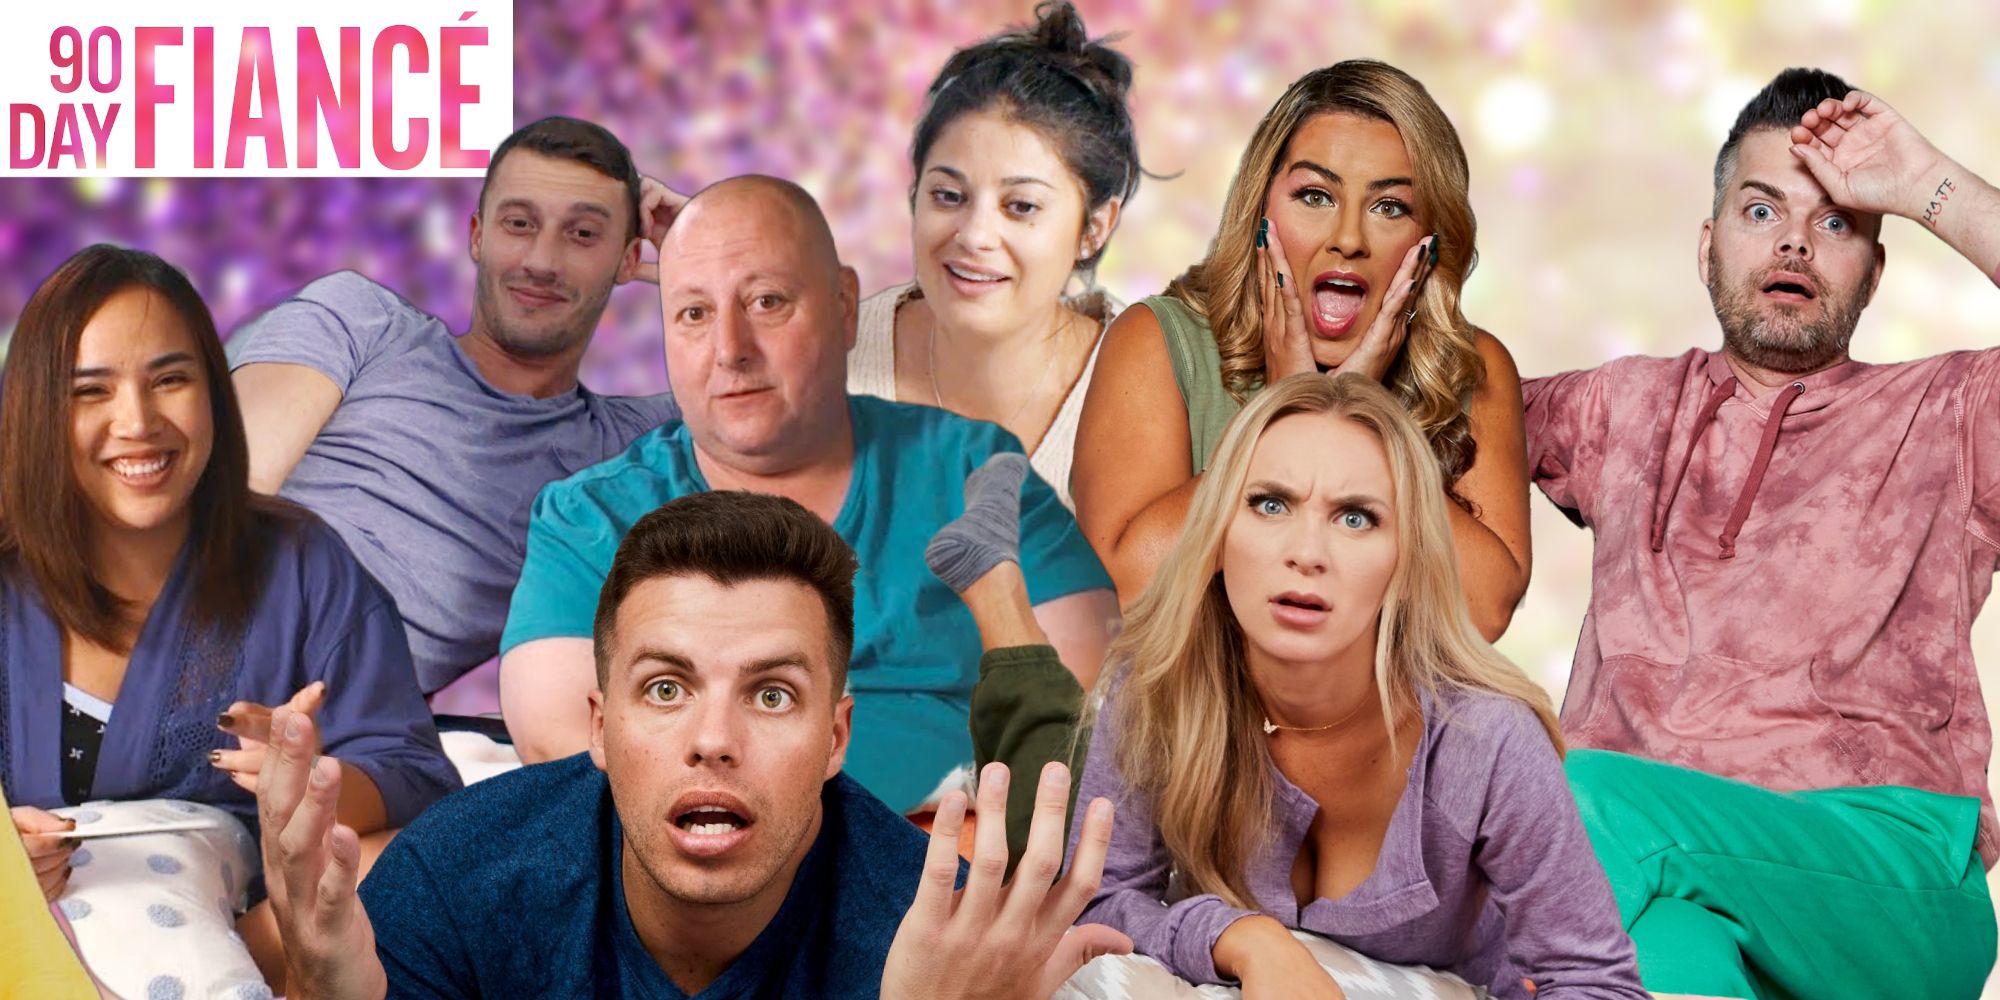 Eight cast members from 90 Day Fiance: Pillow Talk are situated in a collage, looking surprised at the camera. 